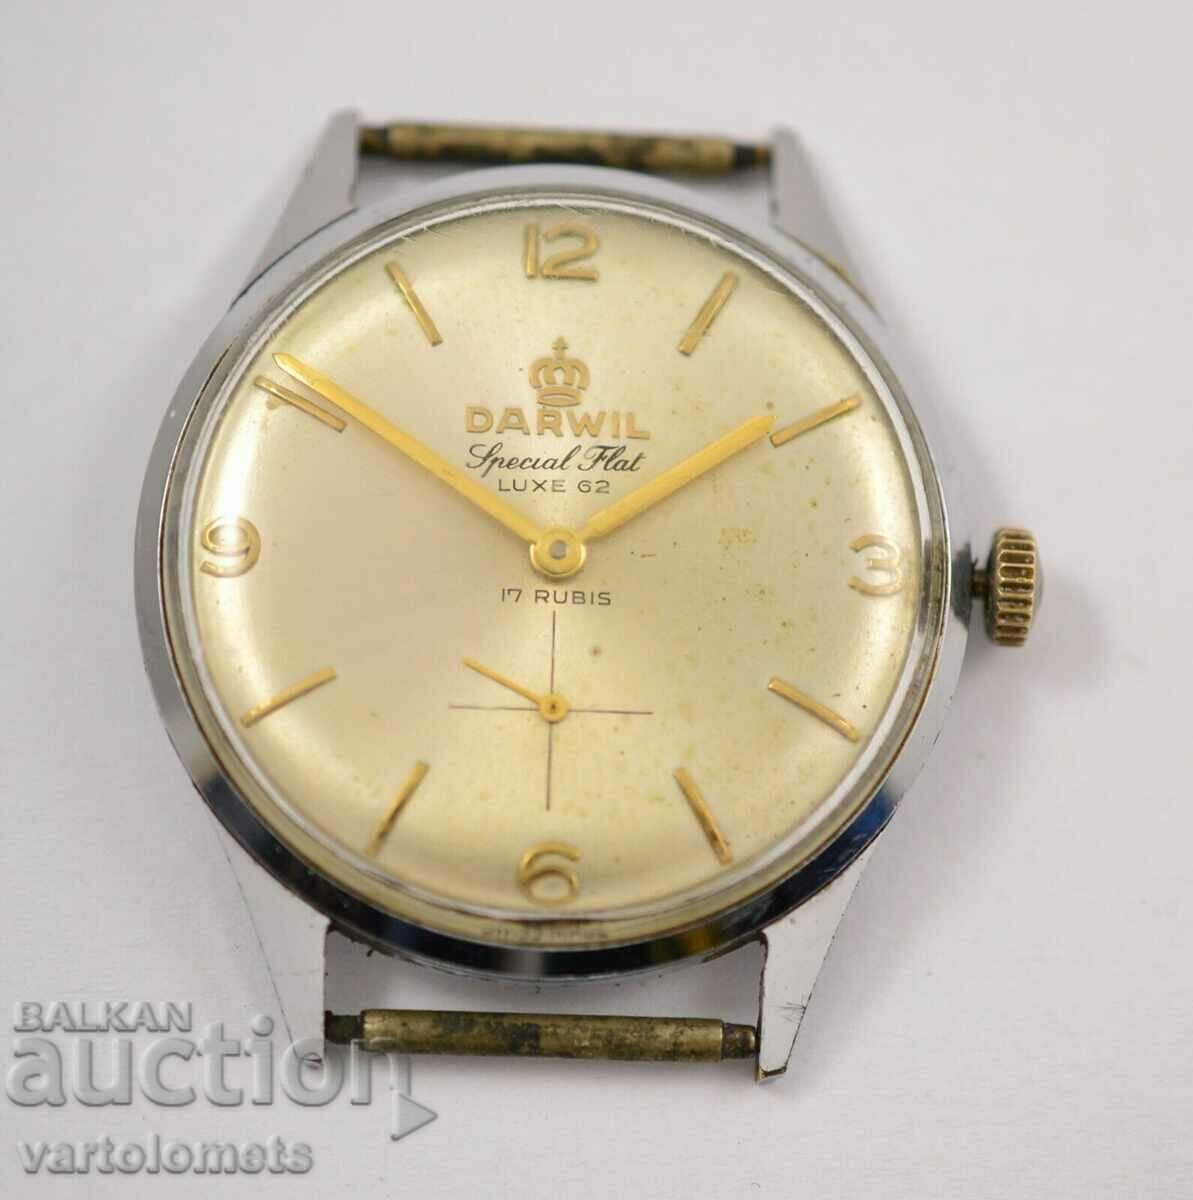 DARWIL Special Flat LUXE 62 SWISS MADE - works